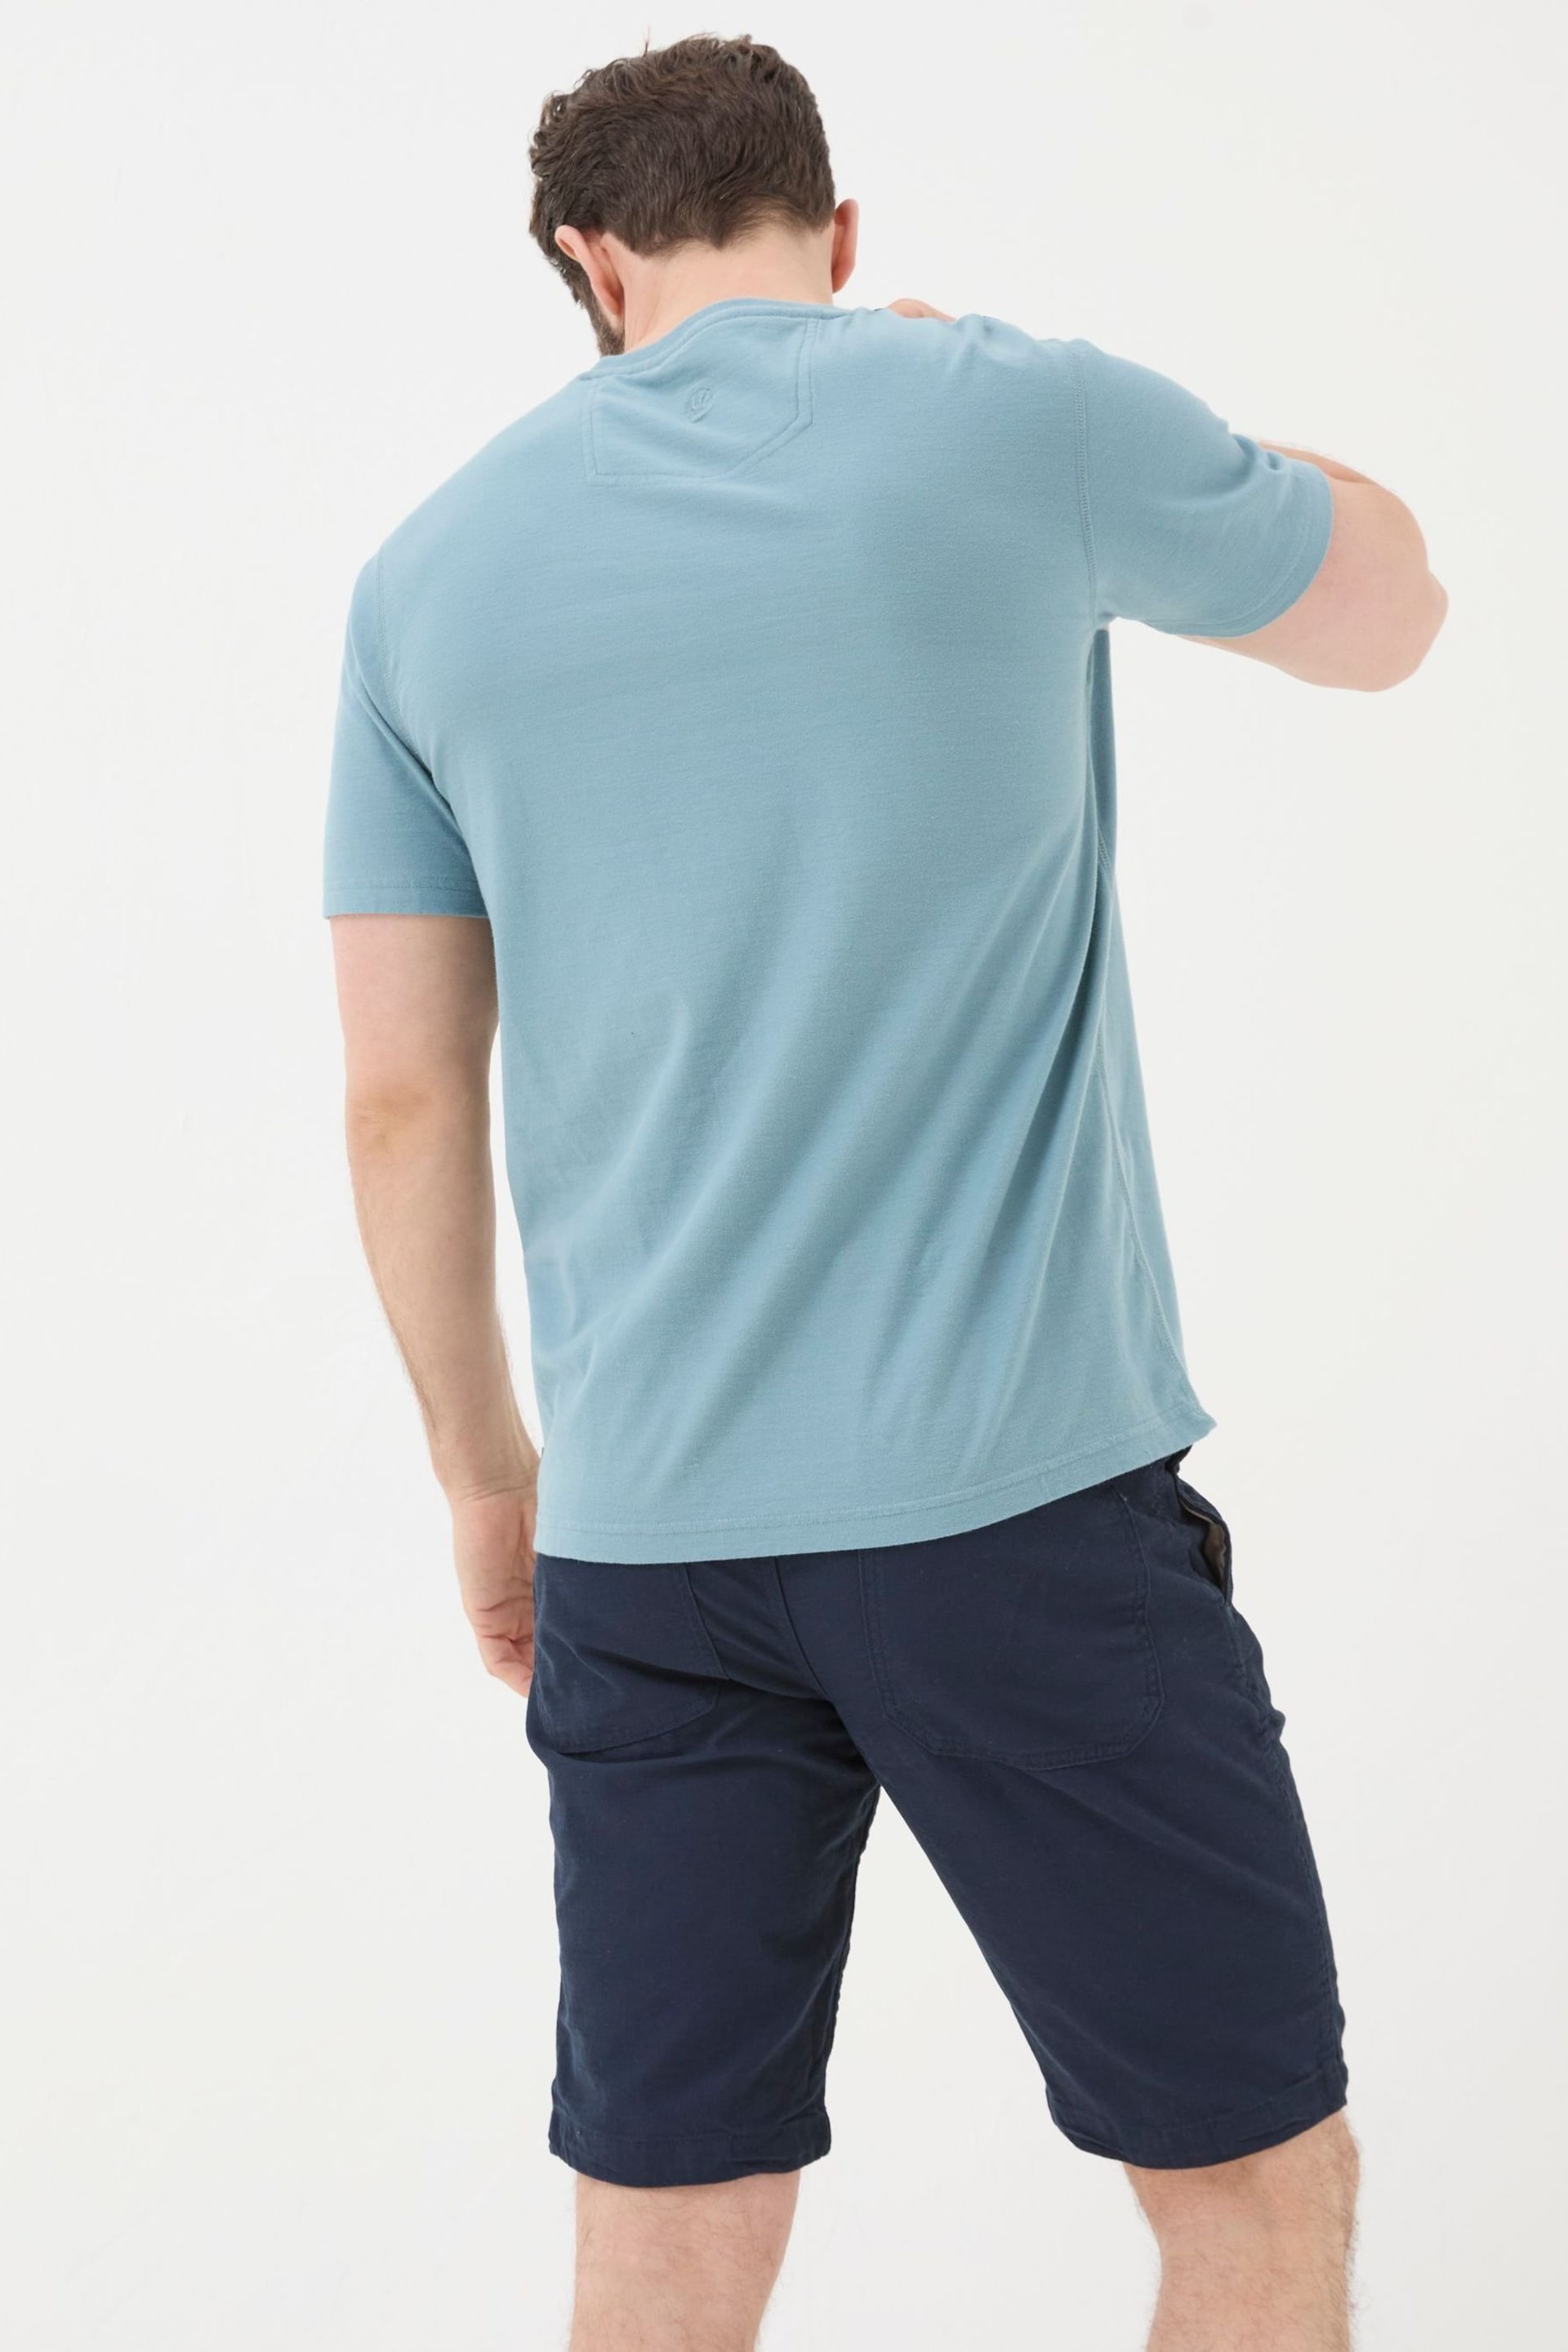 FatFace Blue Chest Stripe T-Shirt - Image 2 of 5